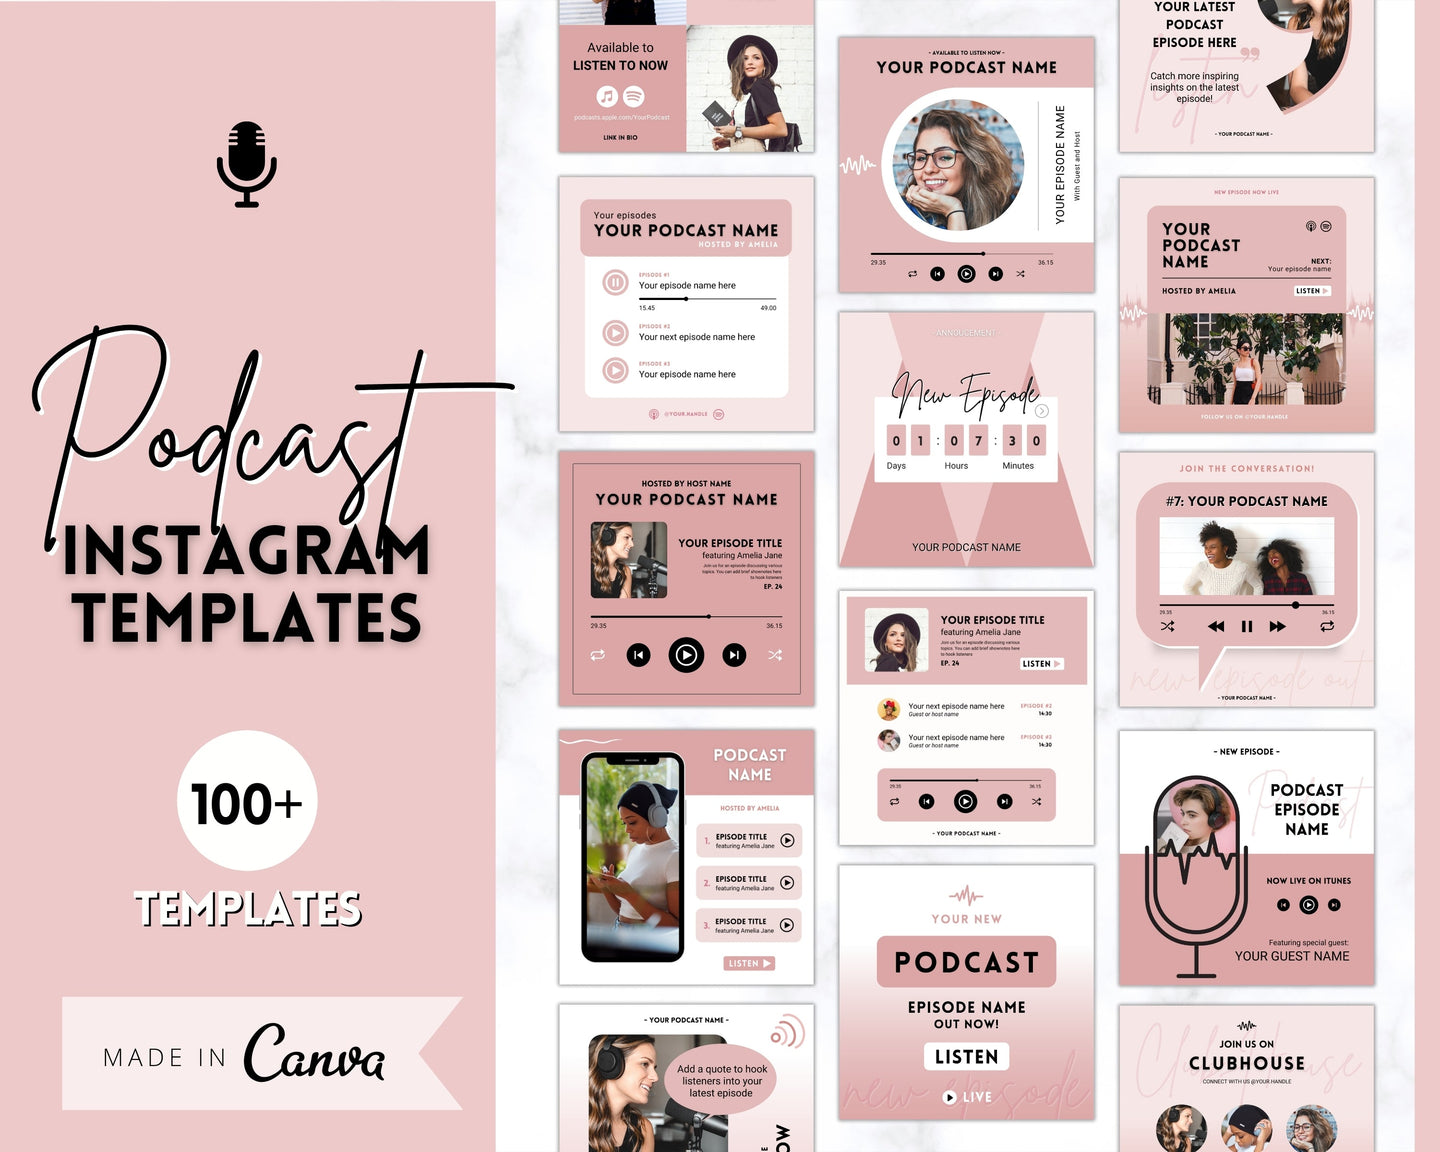 100+ Podcast Instagram Templates! Canva Template Pack. Instagram Square Posts & Stories, Story, Podcasters Podcasting Social Media BUNDLE | Pink